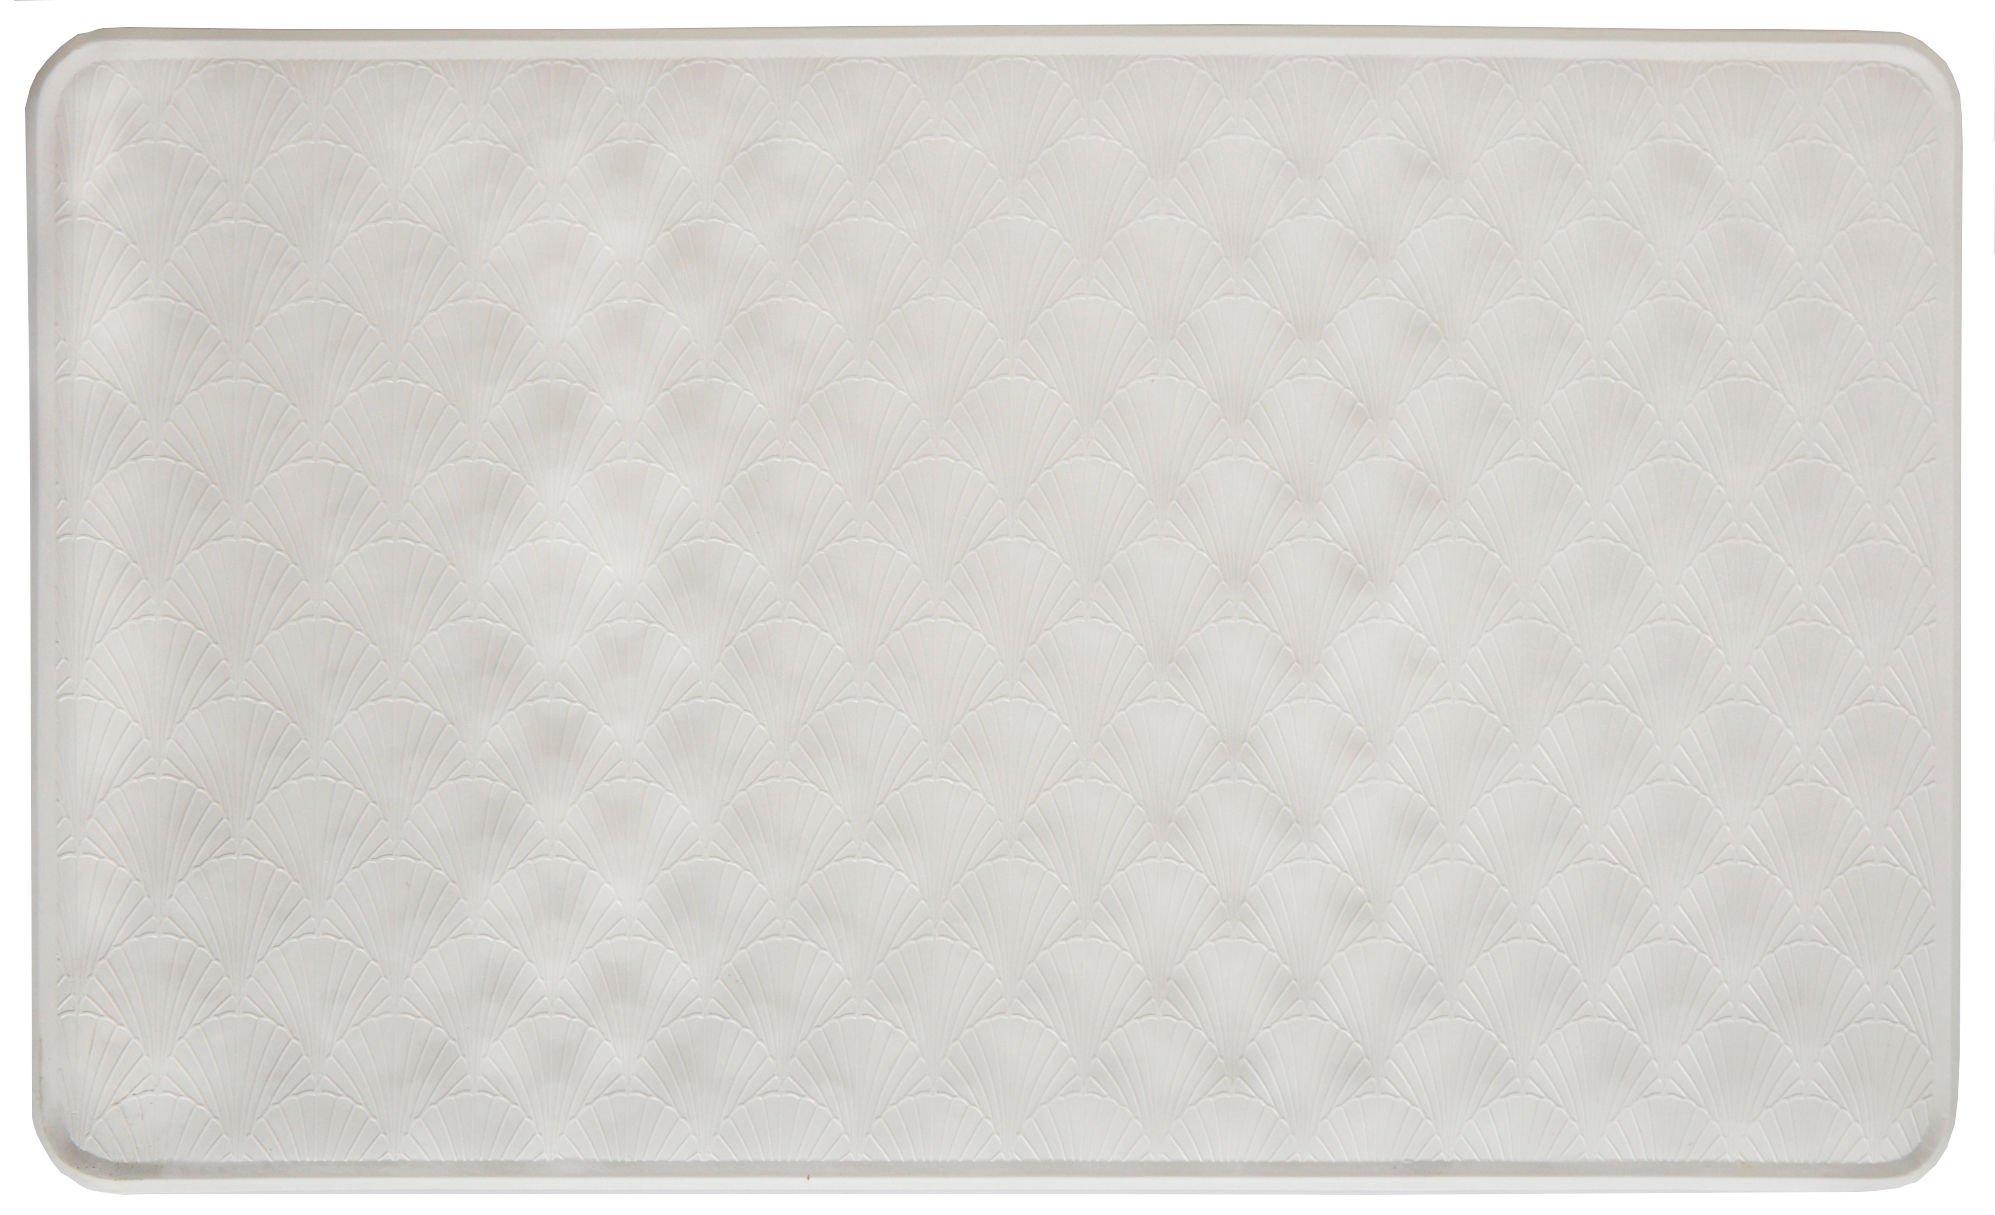 Photos - Other sanitary accessories Zenna Home Shell Rubber Tub Mat